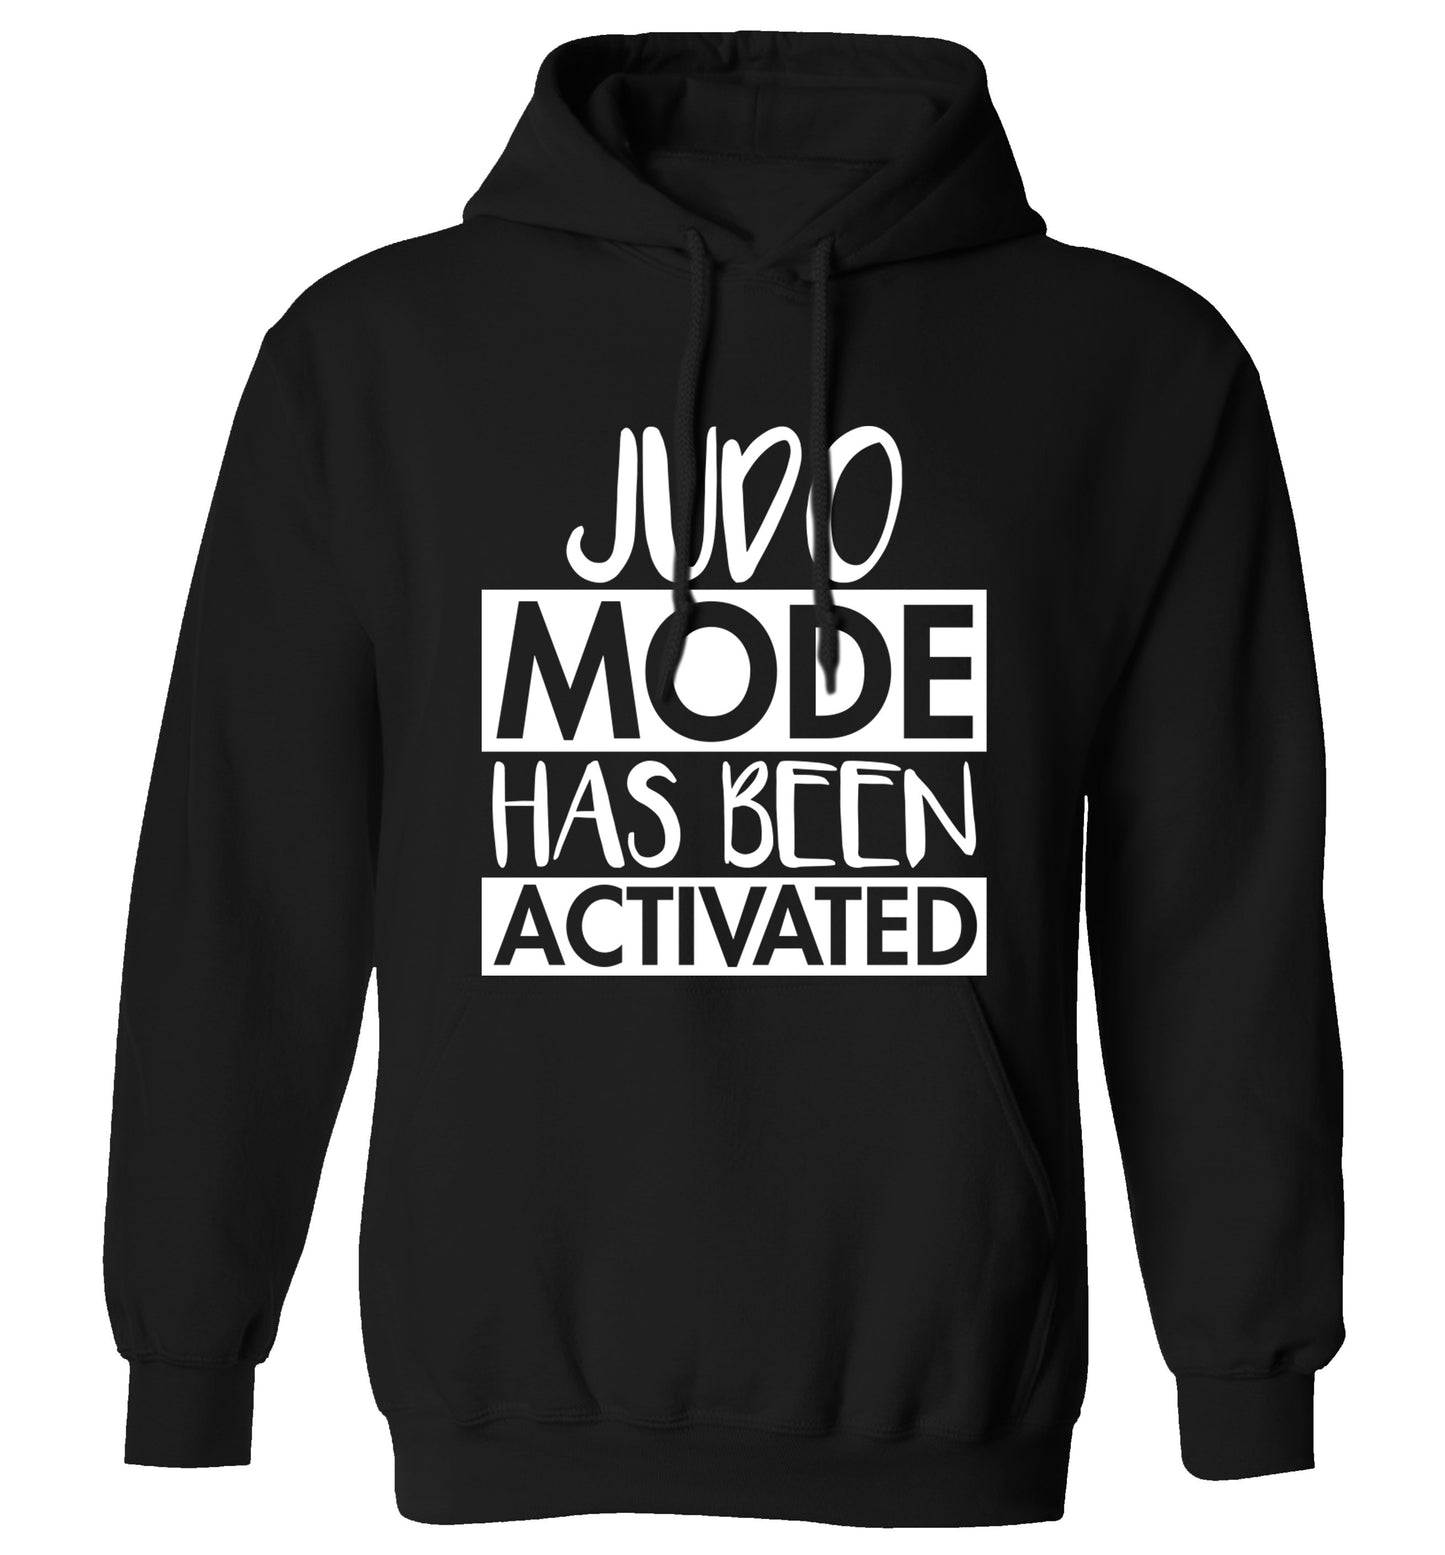 Judo mode activated adults unisex black hoodie 2XL